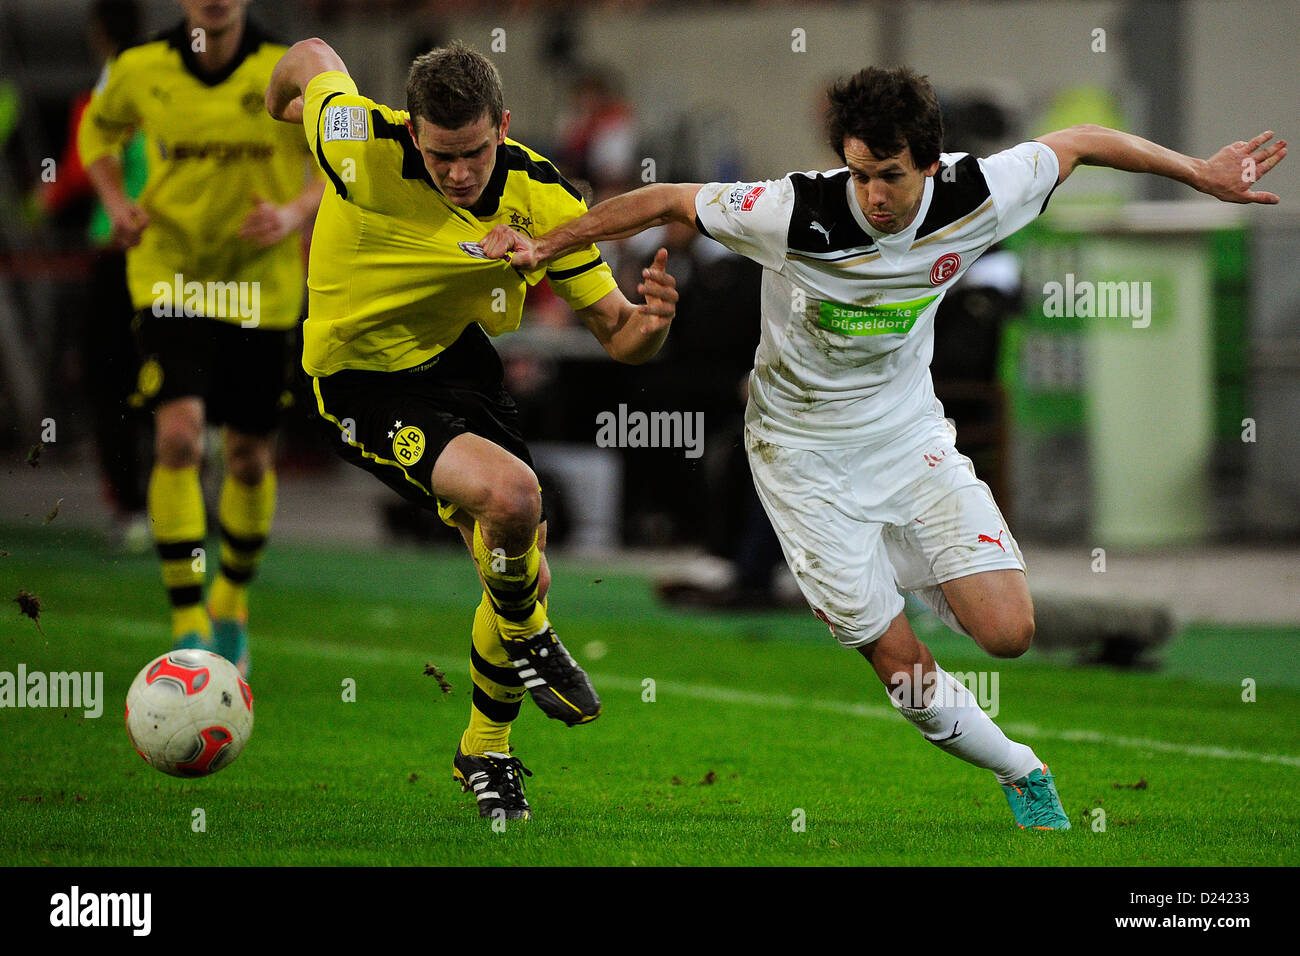 Dortmund's Lars Bender (L) and Duesseldorf's Robbie Kruse vie for the ball during the soccer Winter Cup semi final match Fortuna Duesseldorf vs Borussia Dormund at Esprit Arena in Duesseldorf, Germany, 13 January 2013. Photo: MARIUS BECKER Stock Photo